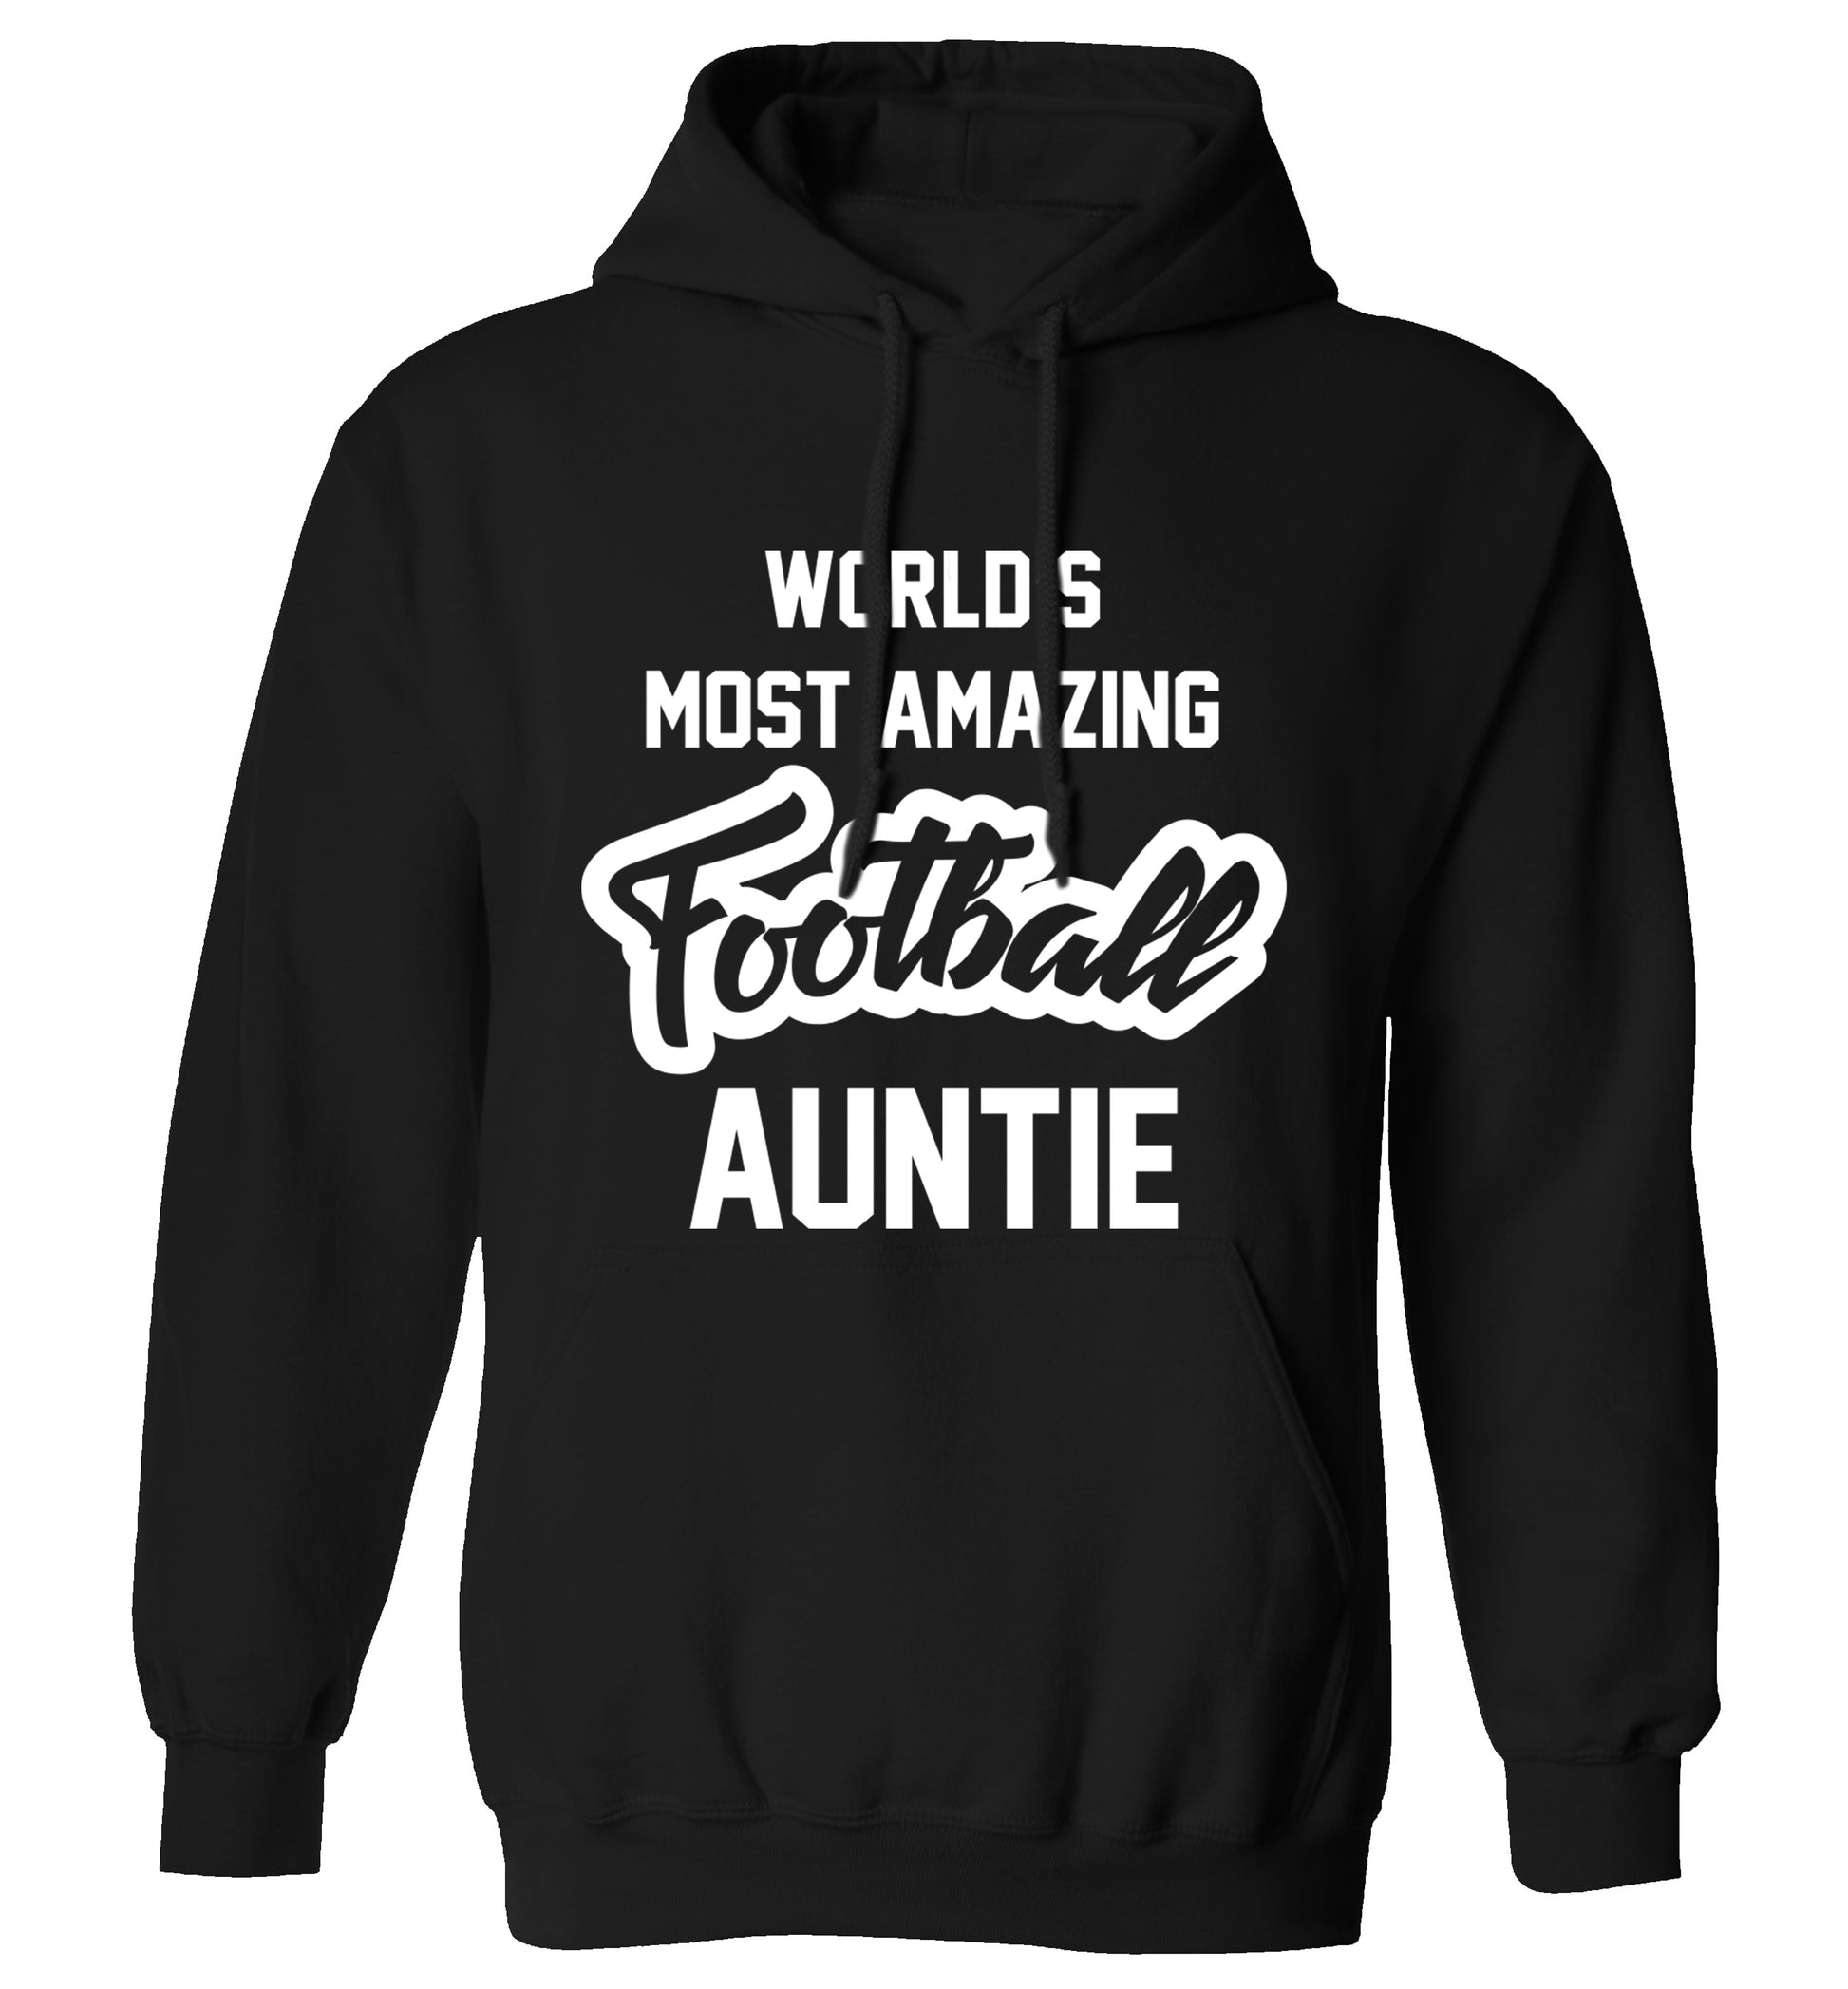 Worlds most amazing football auntie adults unisexblack hoodie 2XL